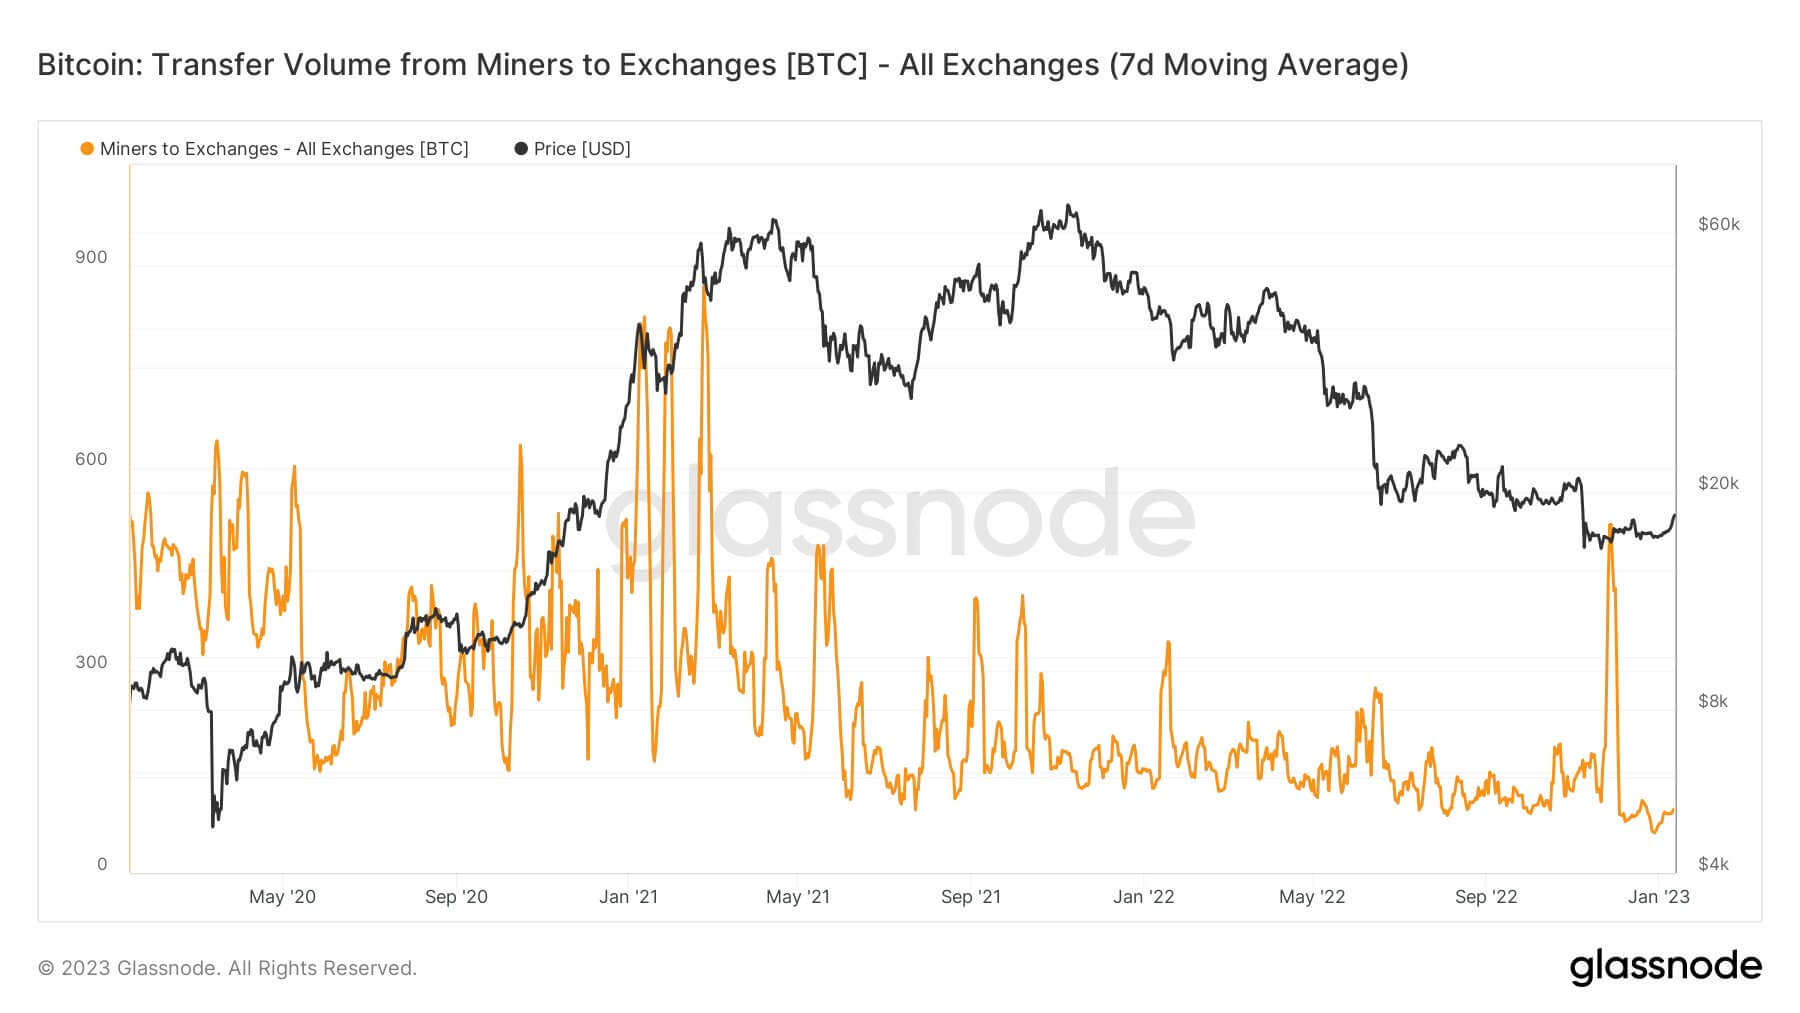 Bitcoin: Amount Transferred from Miners to Exchanges [BTC] - All exchanges (7 days moving average)